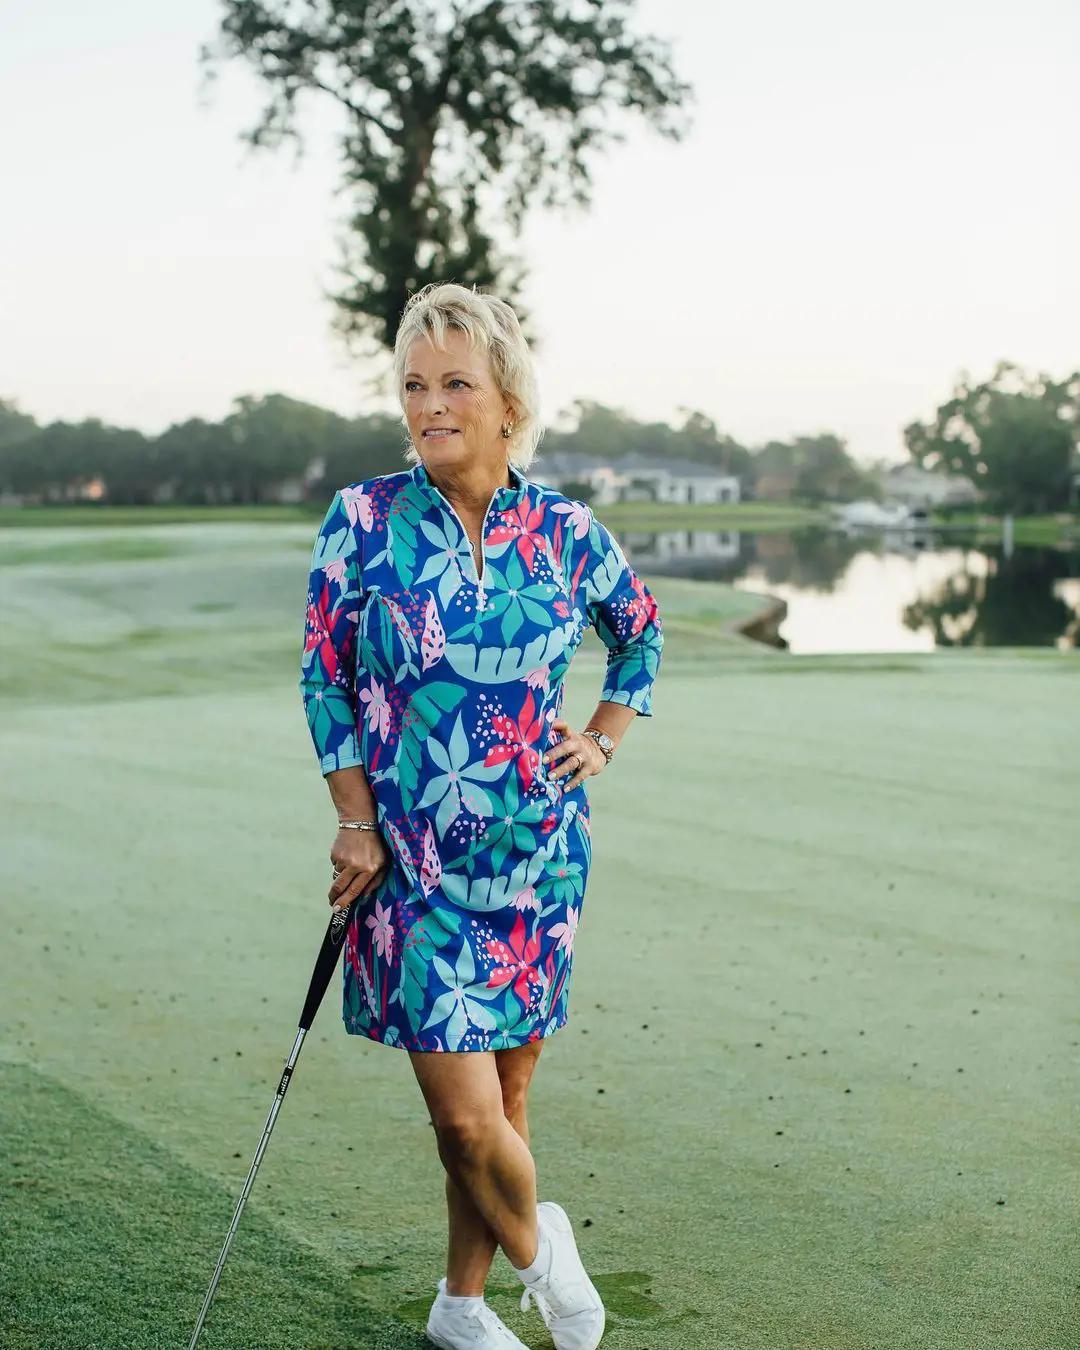 Dottie Pepper strikes a pose with a golf club, January 2022